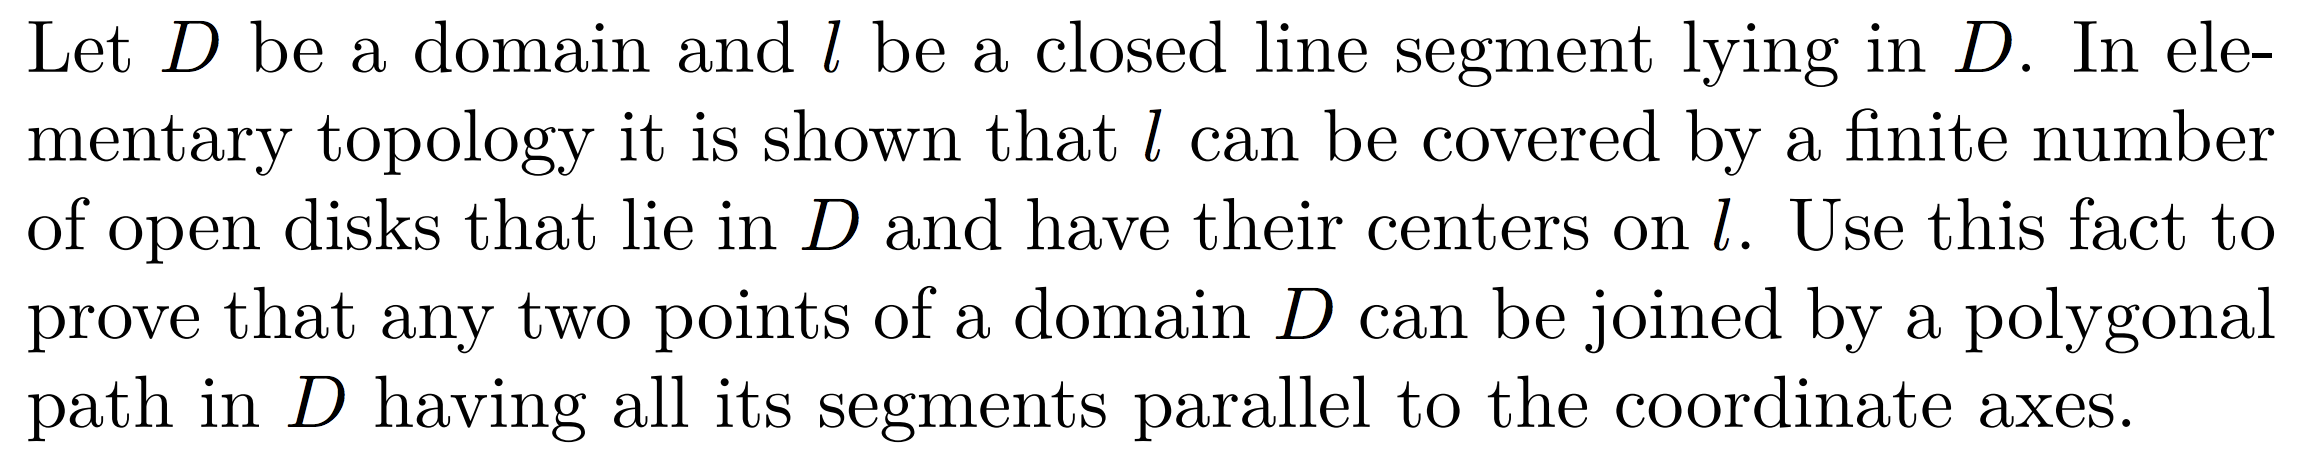 Let D be a domain and l be a closed line segment lying in D. In ele-
mentary topology it is shown that l can be covered by a finite numbeir
of open disks that lie in D and have their centers on l. Use this fact to
prove that any two points of a domain D can be joined by a polygonal
path in D having all its segments parallel to the coordinate axes.
